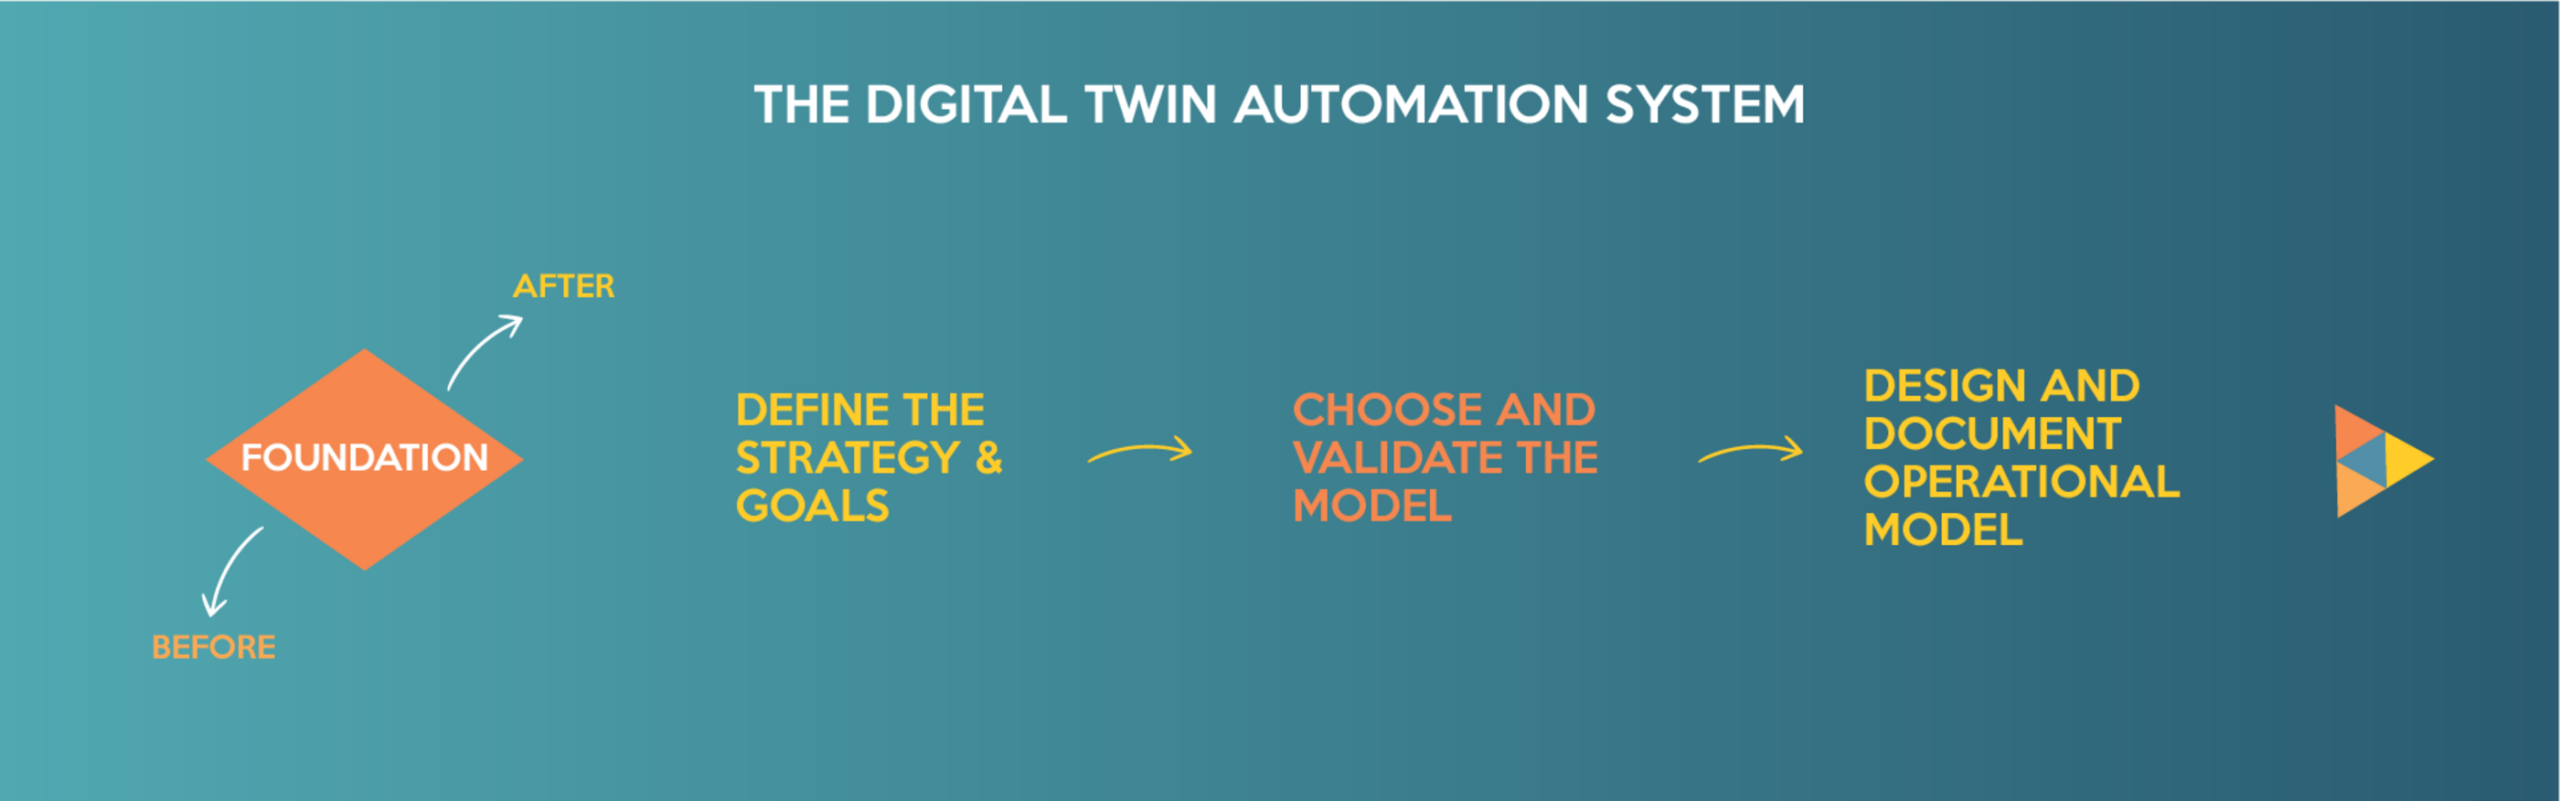 Infografico Digital Twin Automation System 1 1